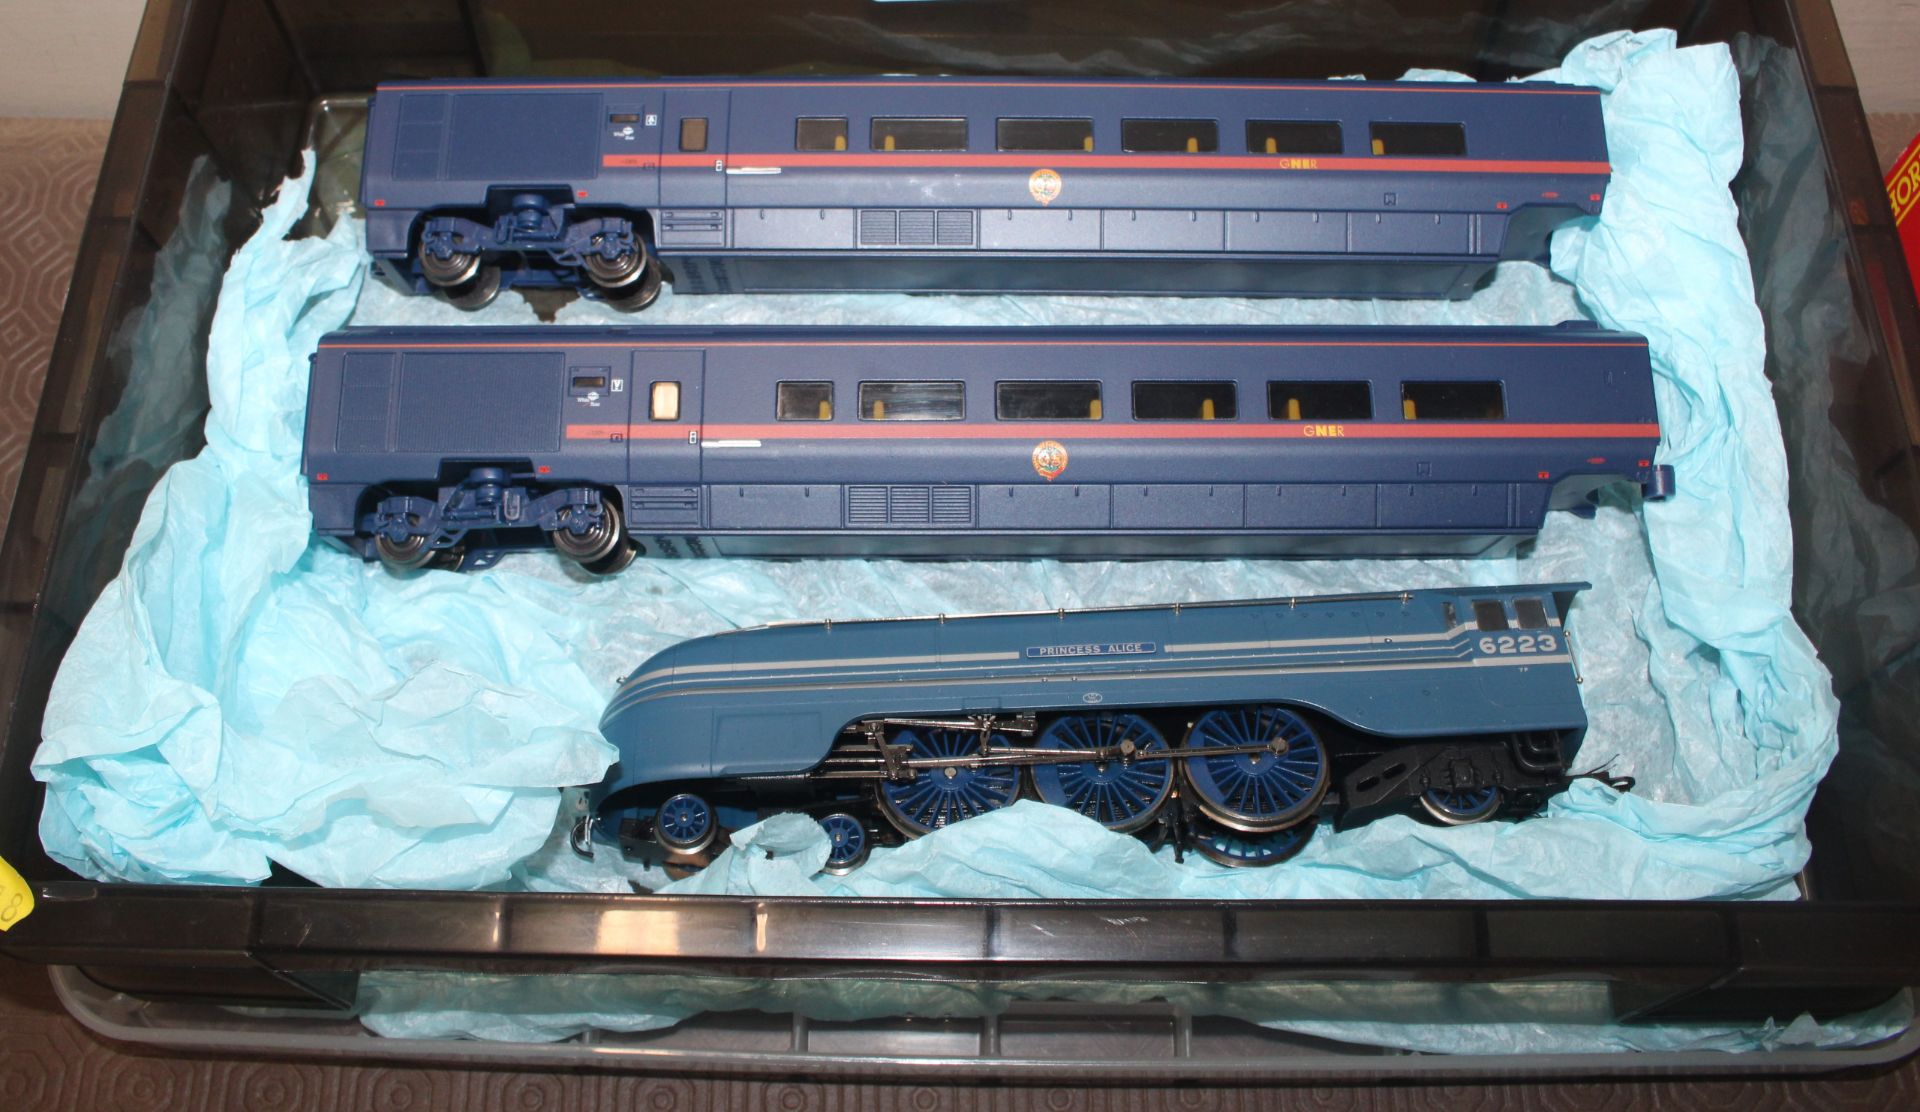 Two Hornby GNER 3306 locomotives; and carriages; and a LMS 6223 locomotive "Princess Alice" and - Image 20 of 34